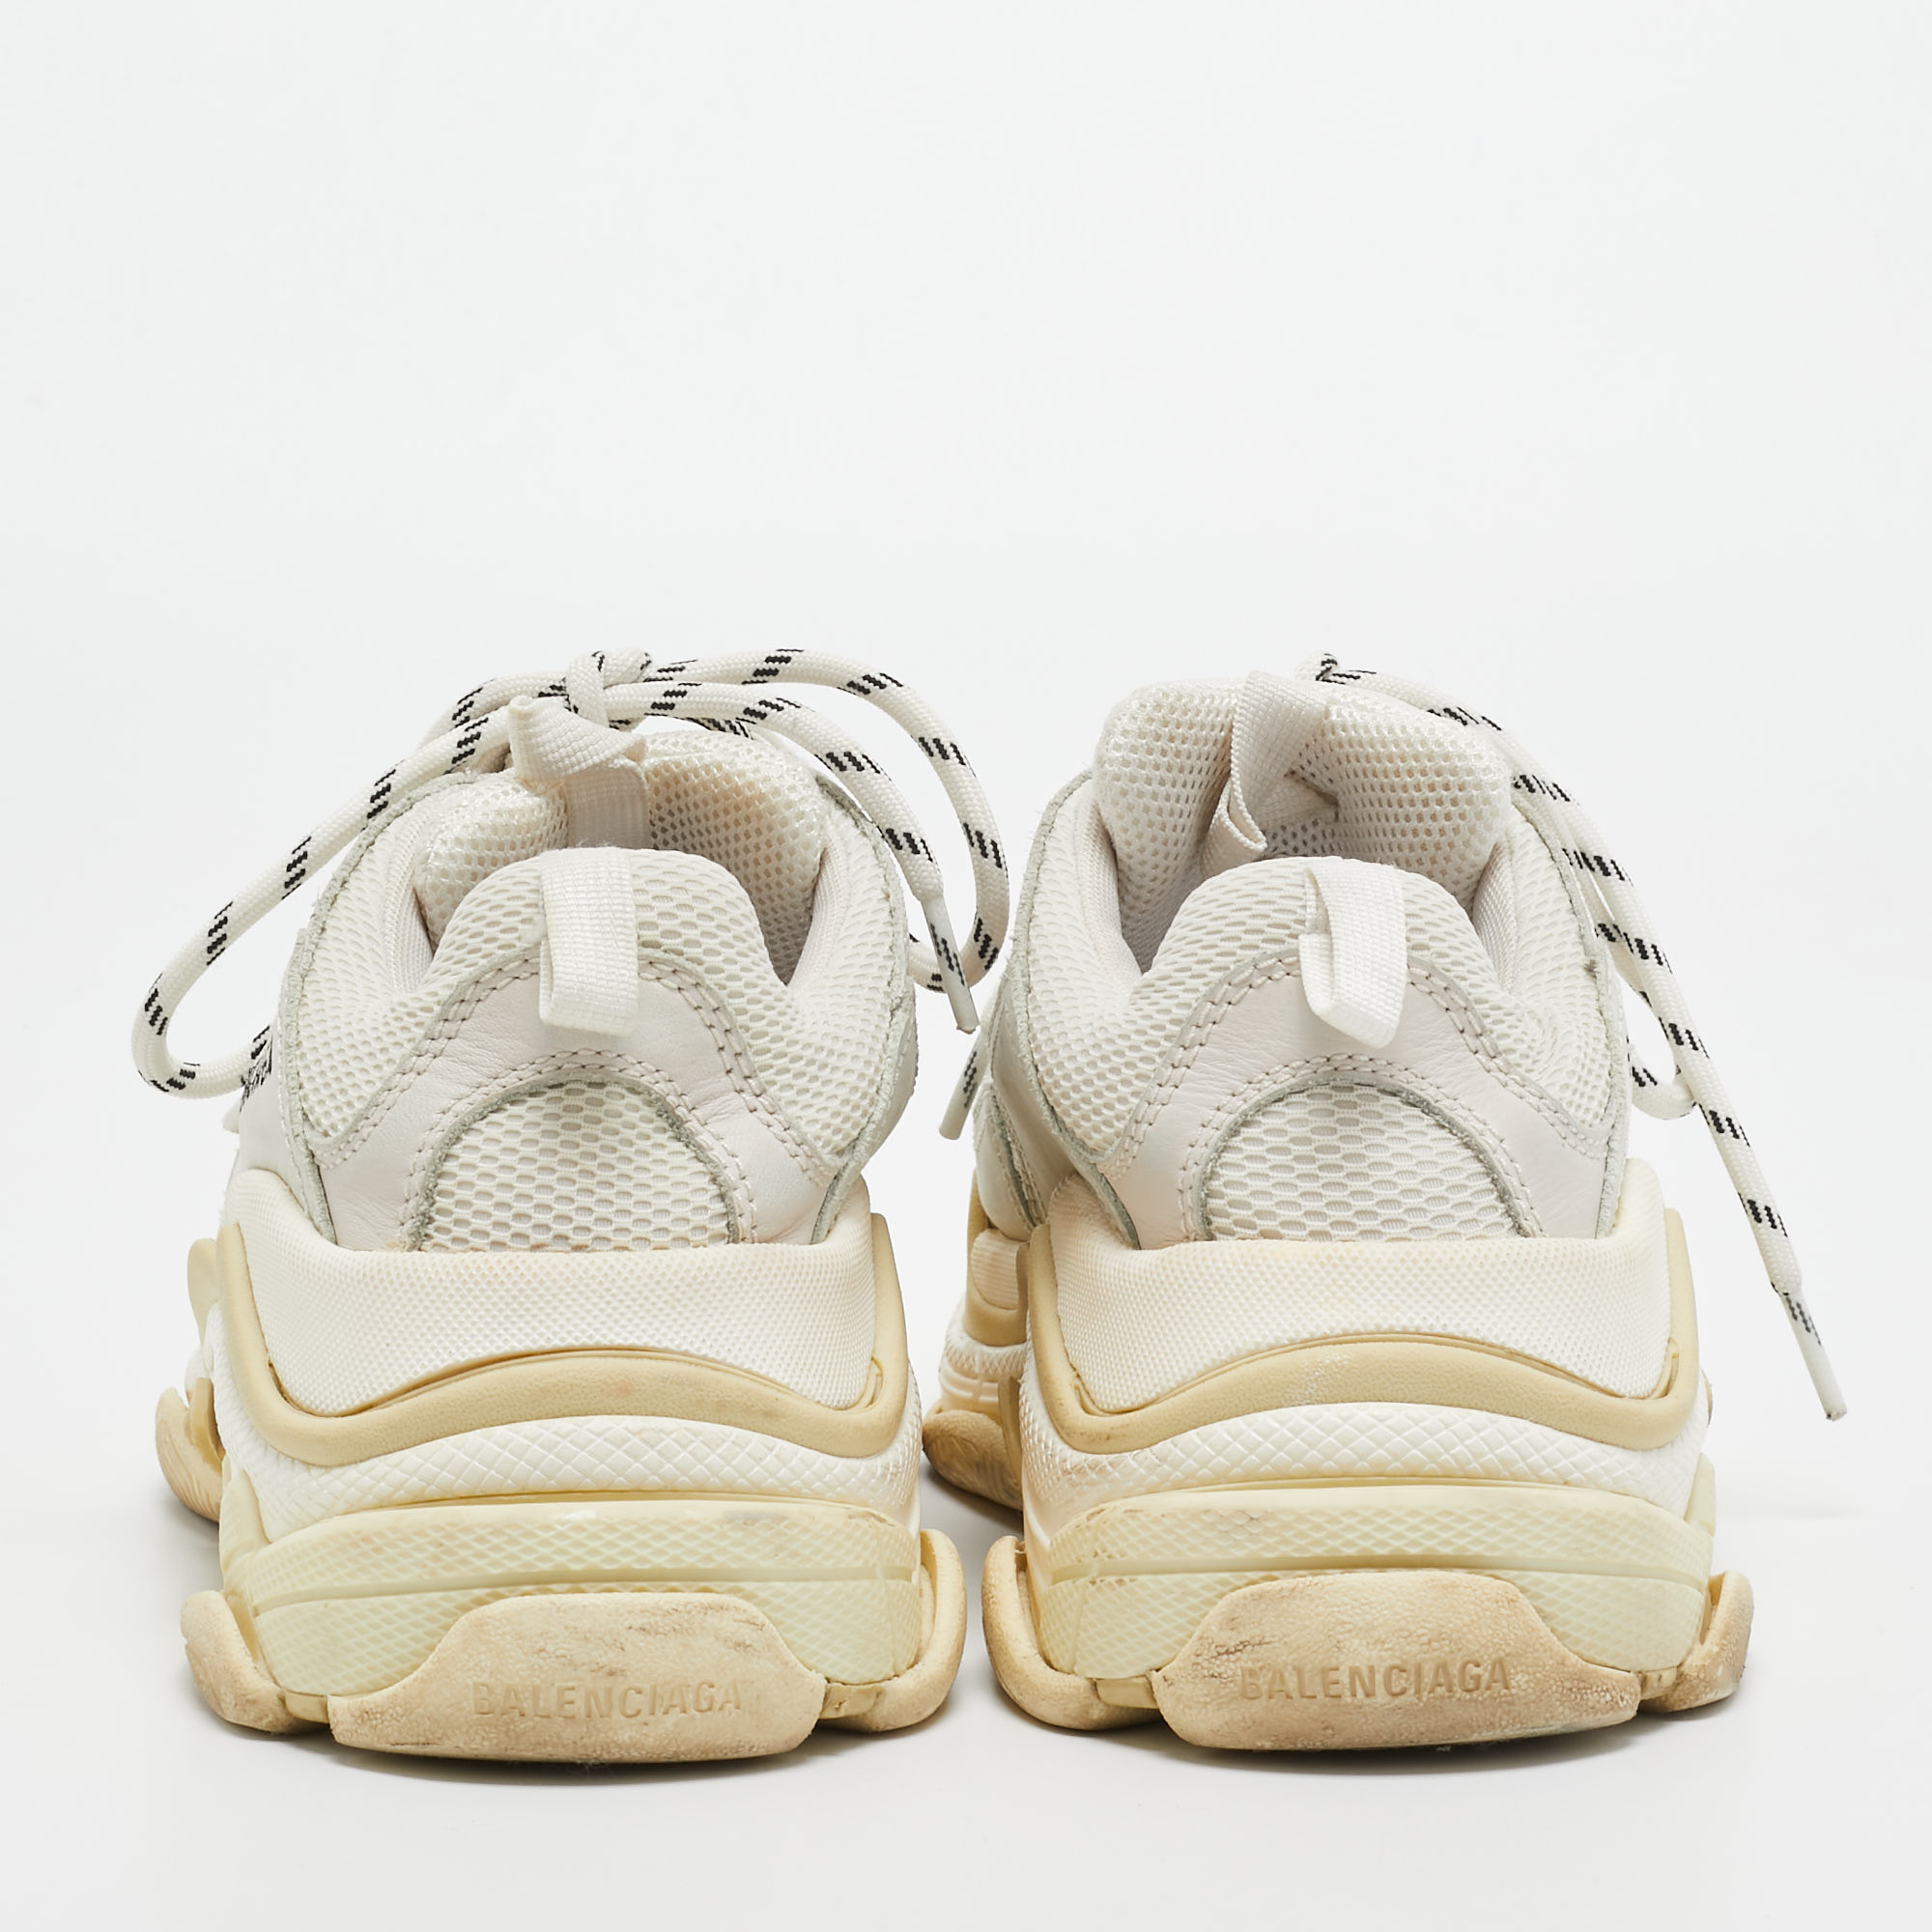 Balenciaga White/Grey Mesh And Leather Triple S Sneakers Size 37